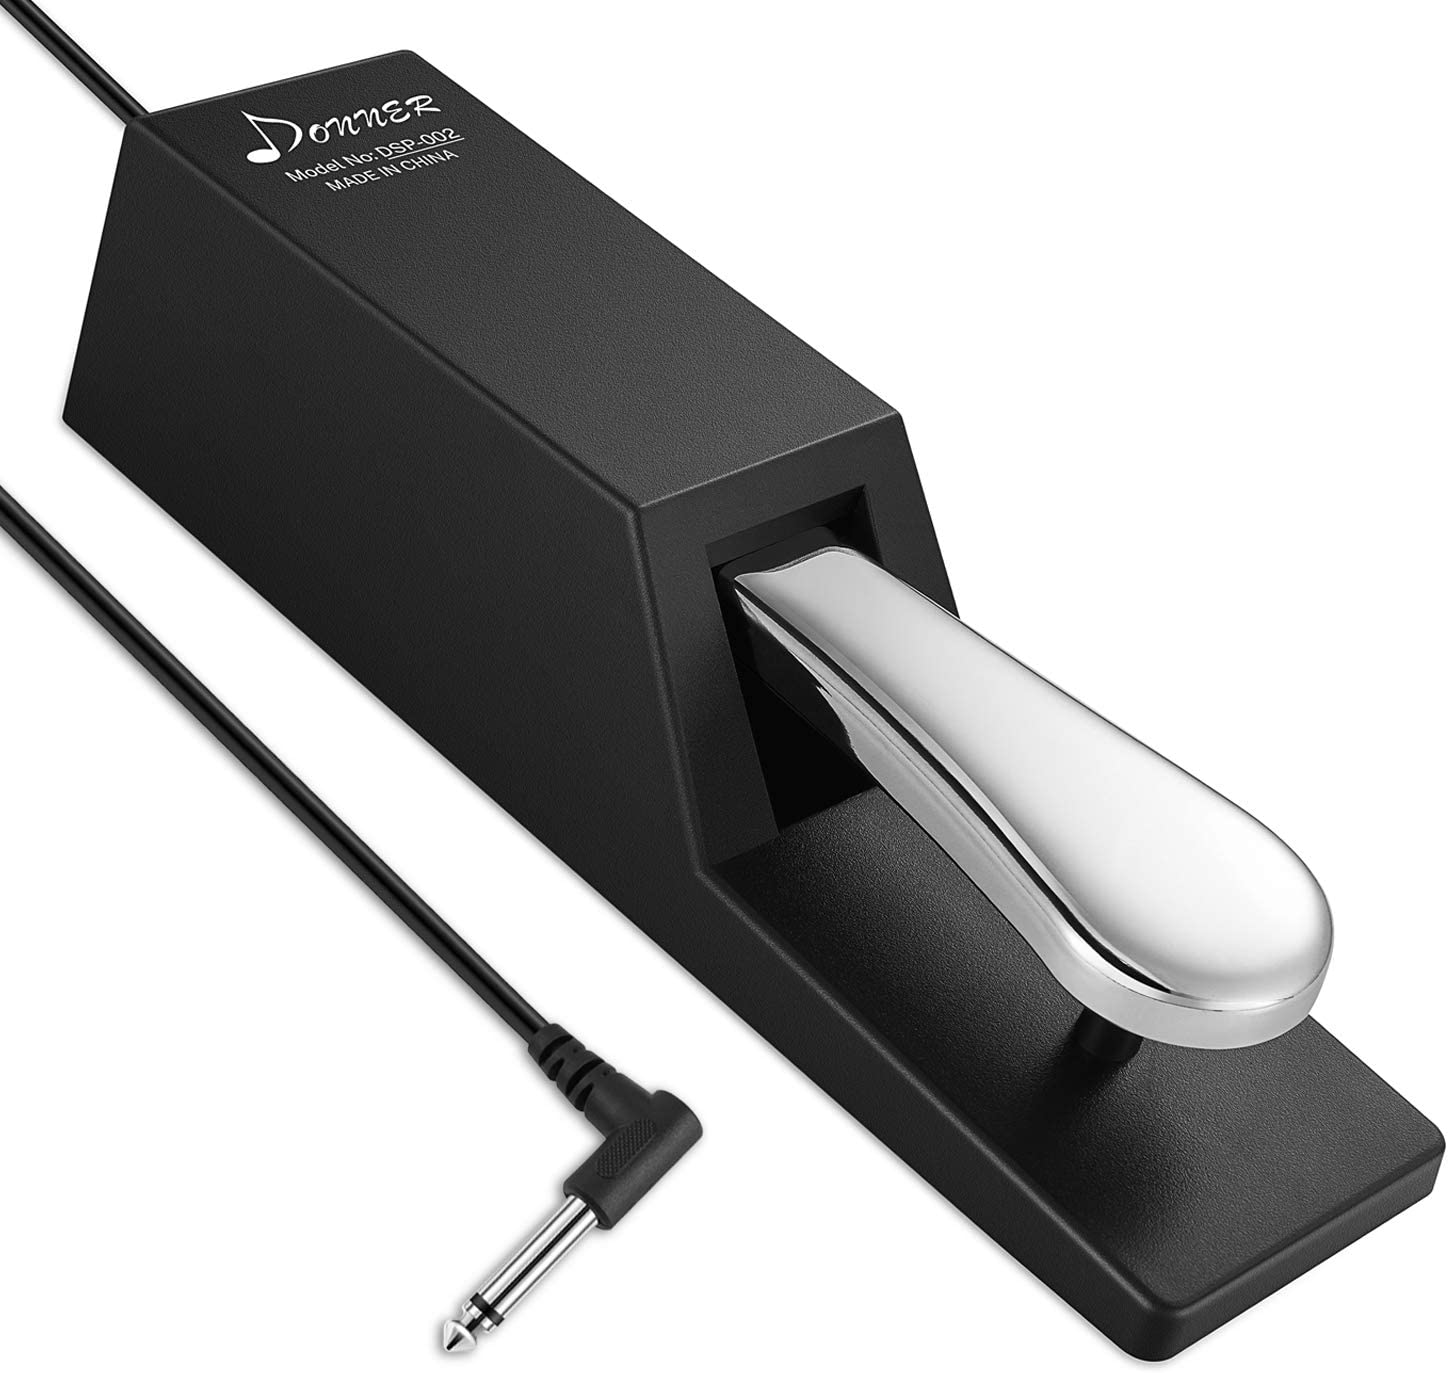 Donner DSP-002 Sustain Pedal for Keyboard Digital Piano Foot Pedal.